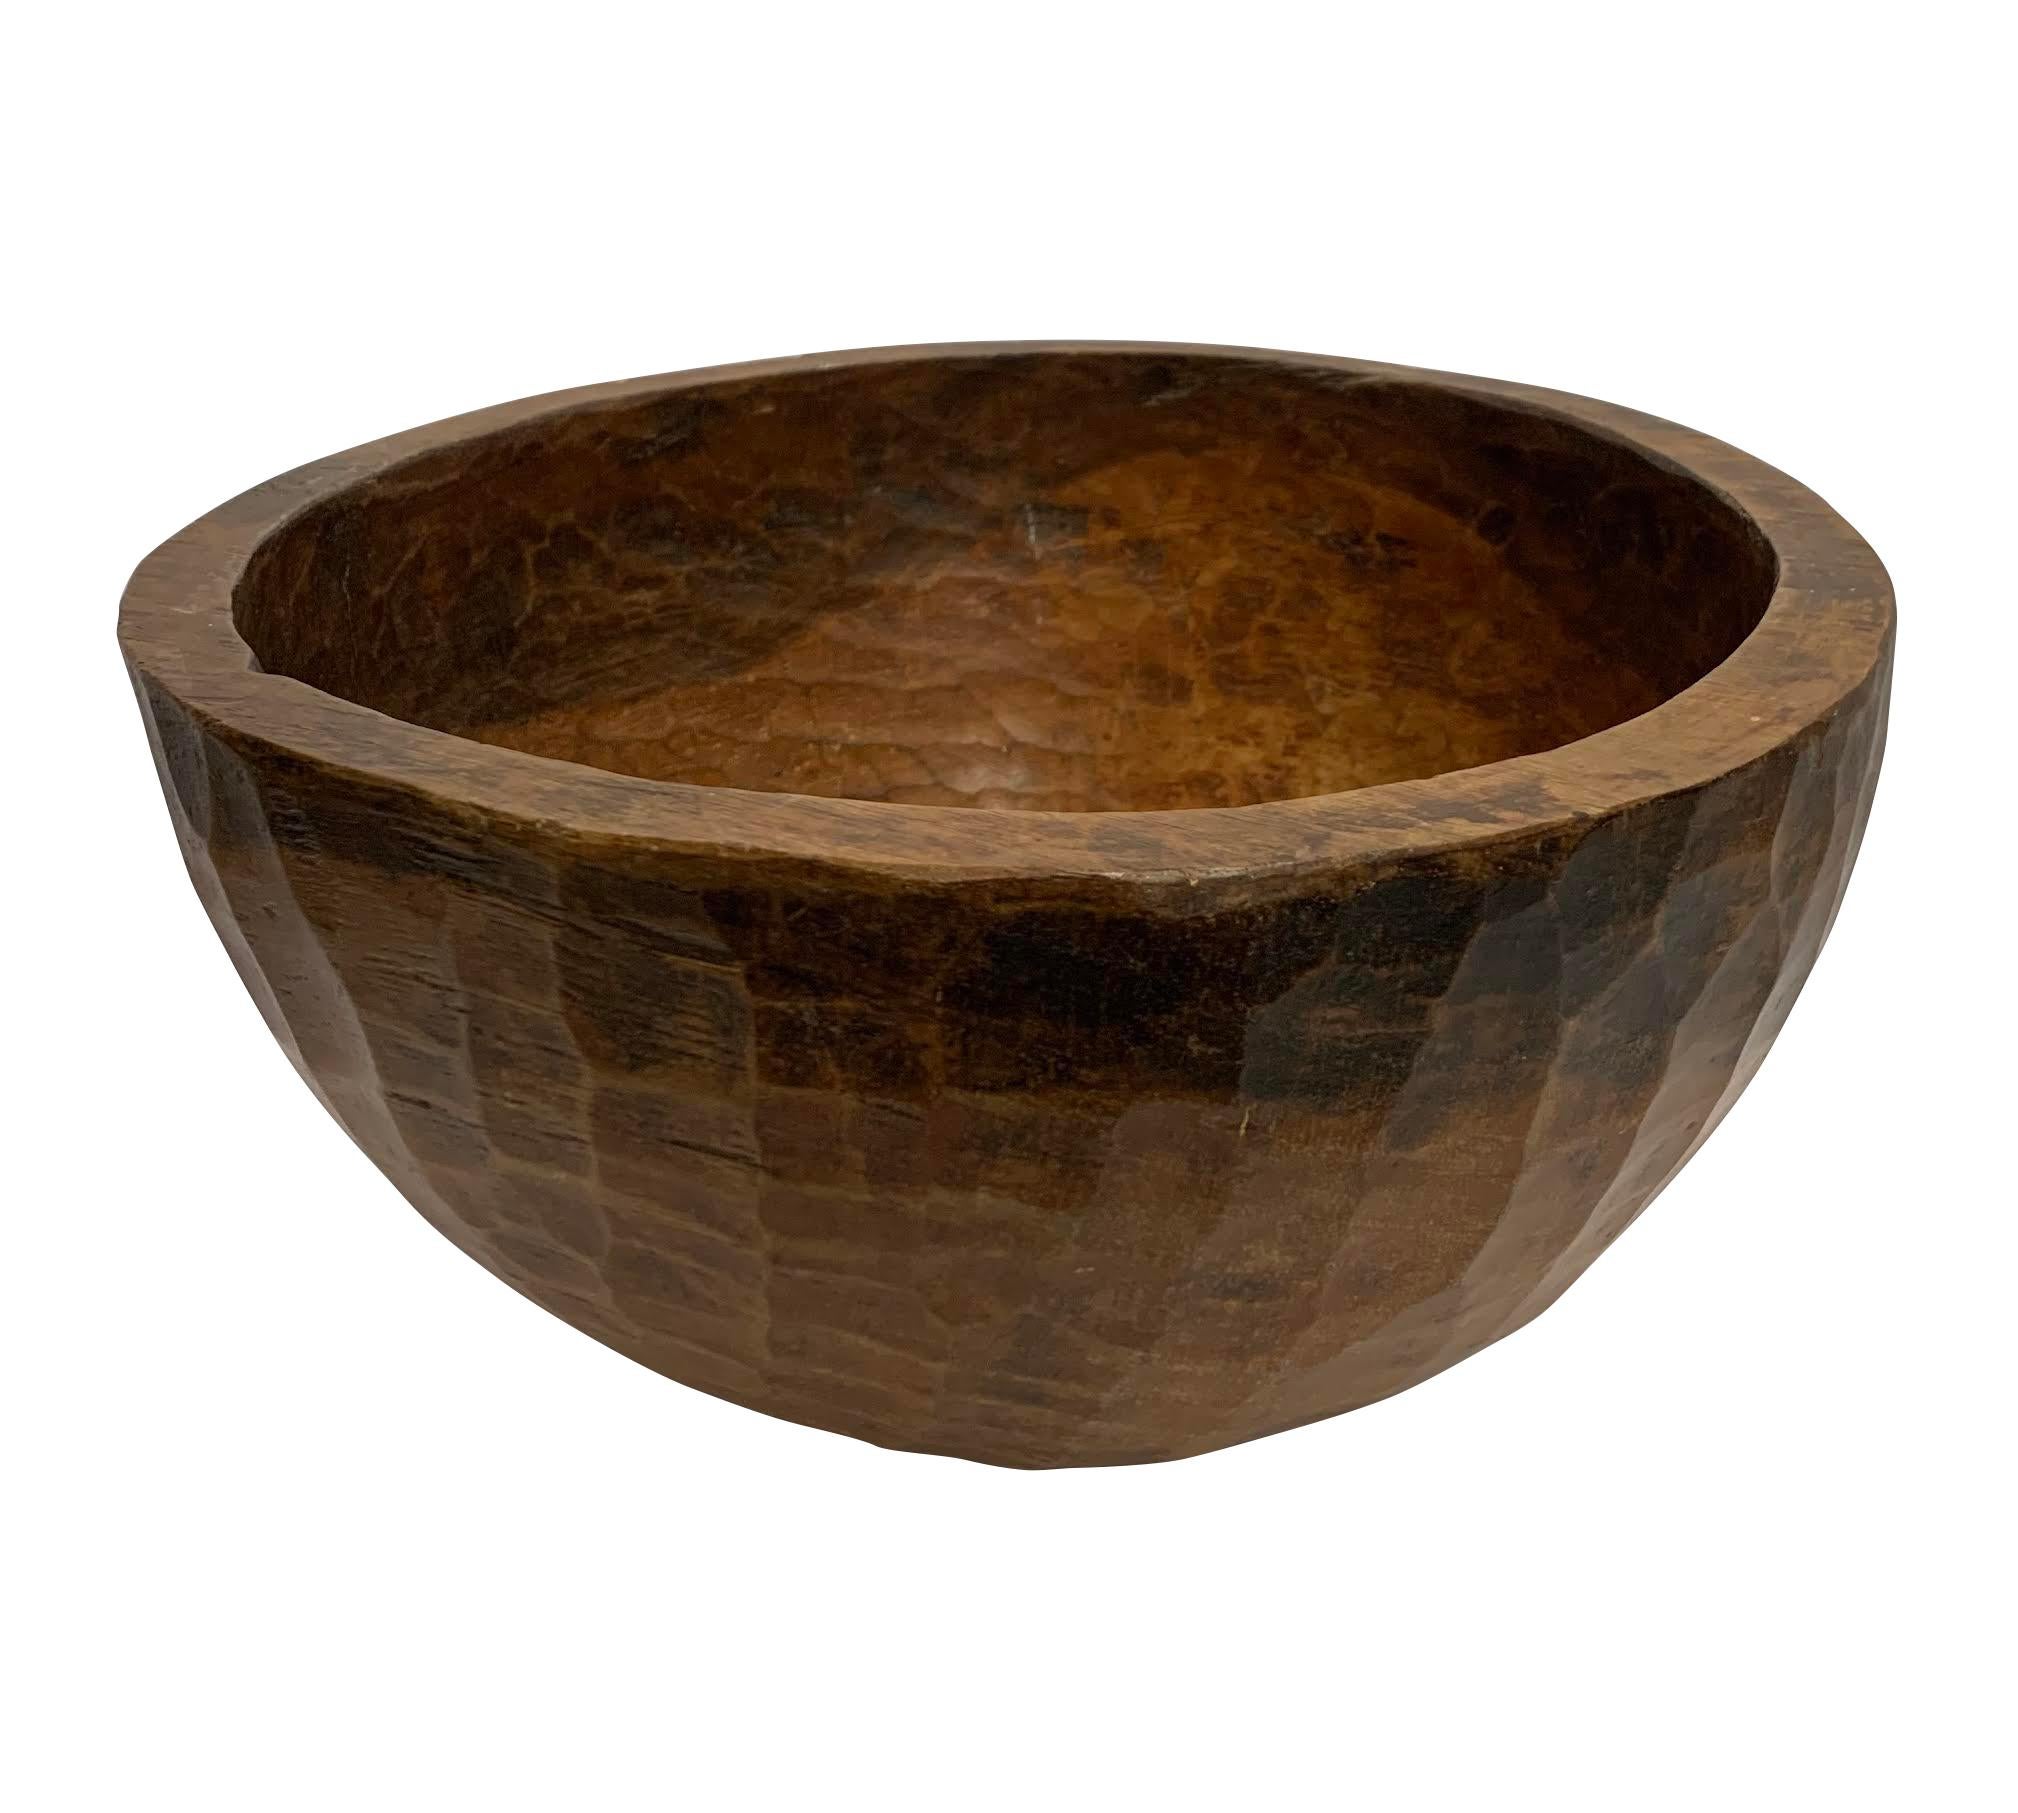 19th century India large carved wooden bowl.
From the state of Nagaland, India.
Used originally to prepare food.